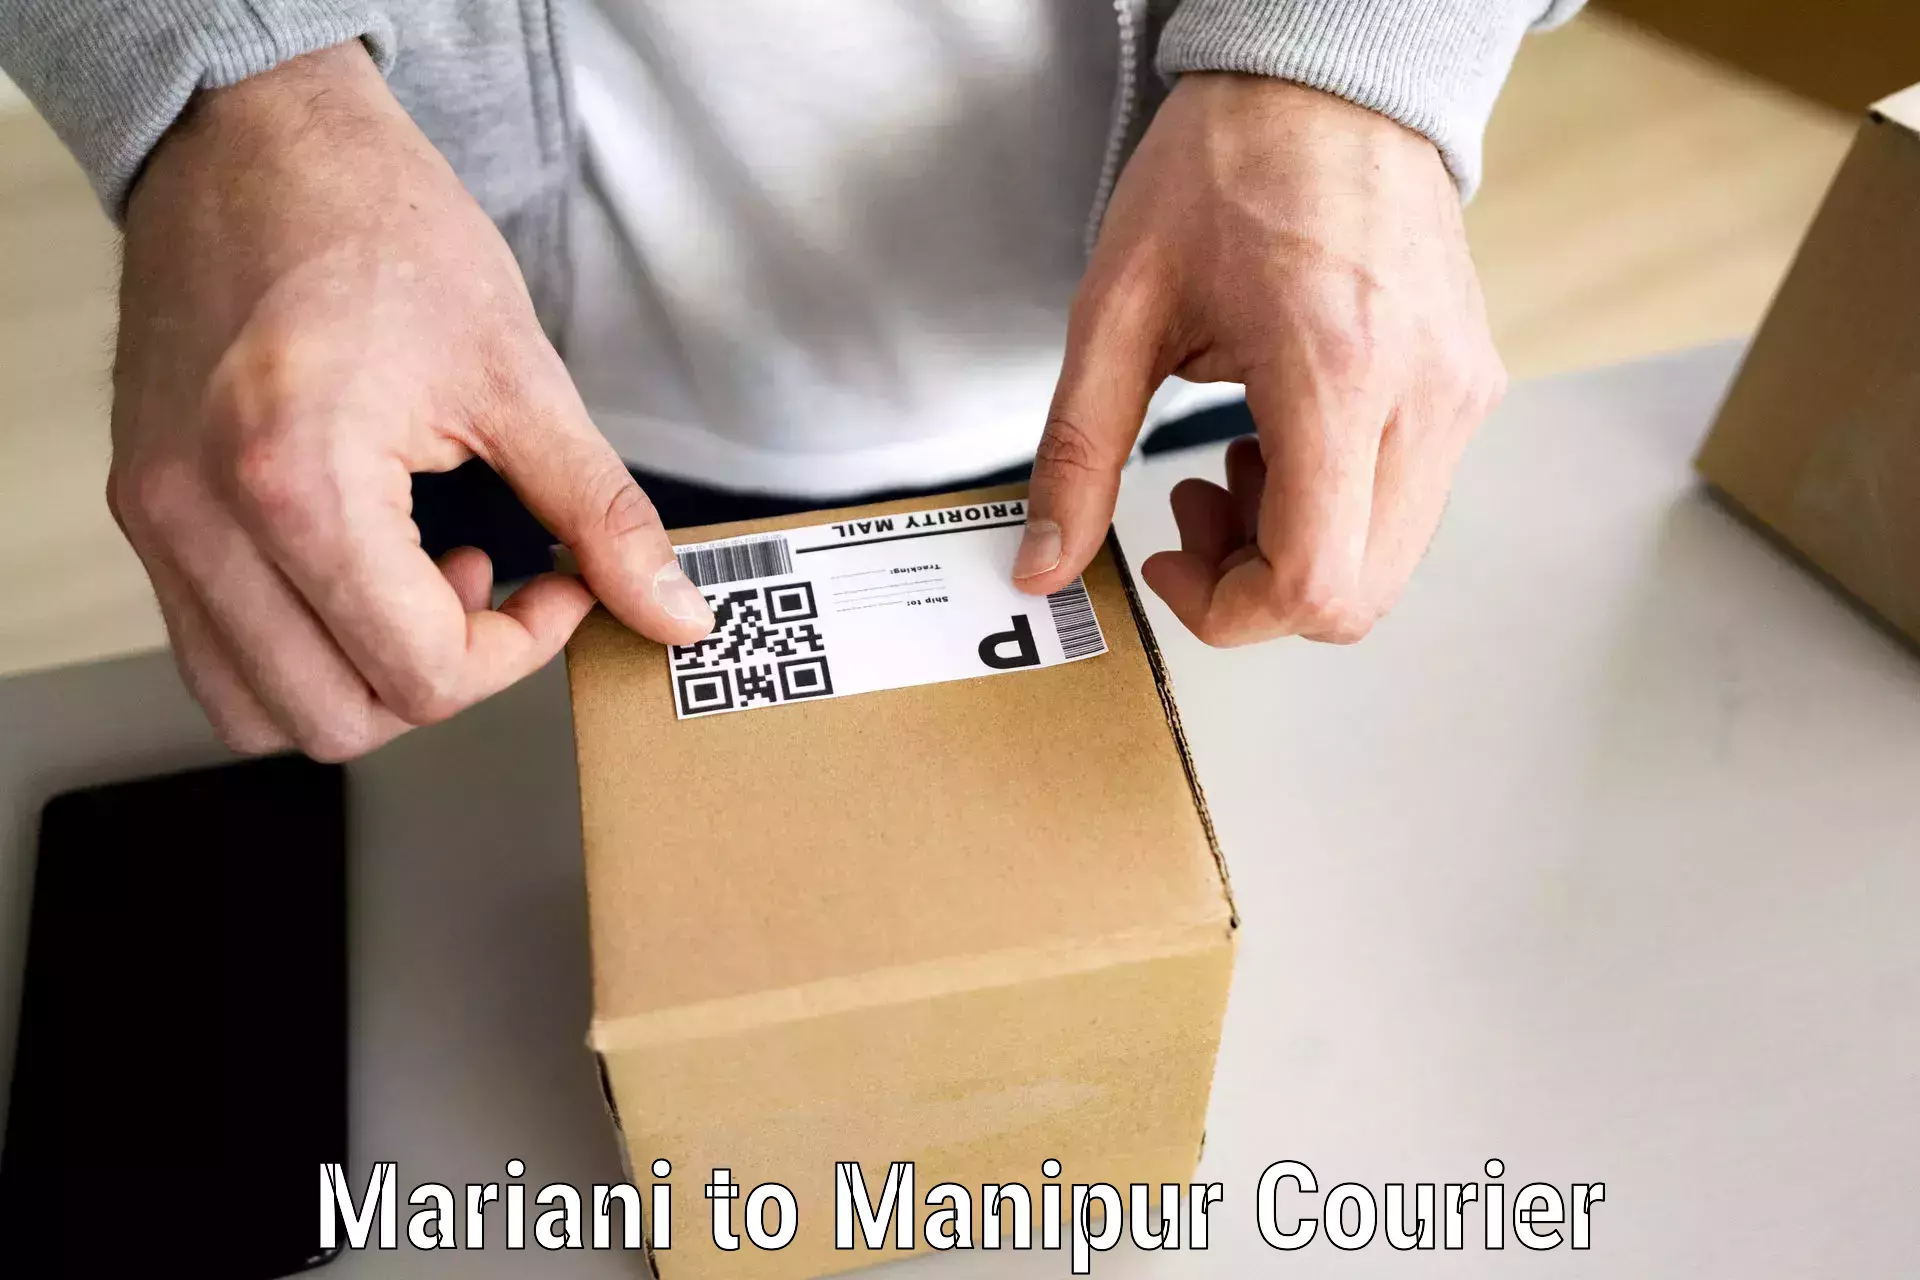 Furniture transport specialists Mariani to Tamenglong